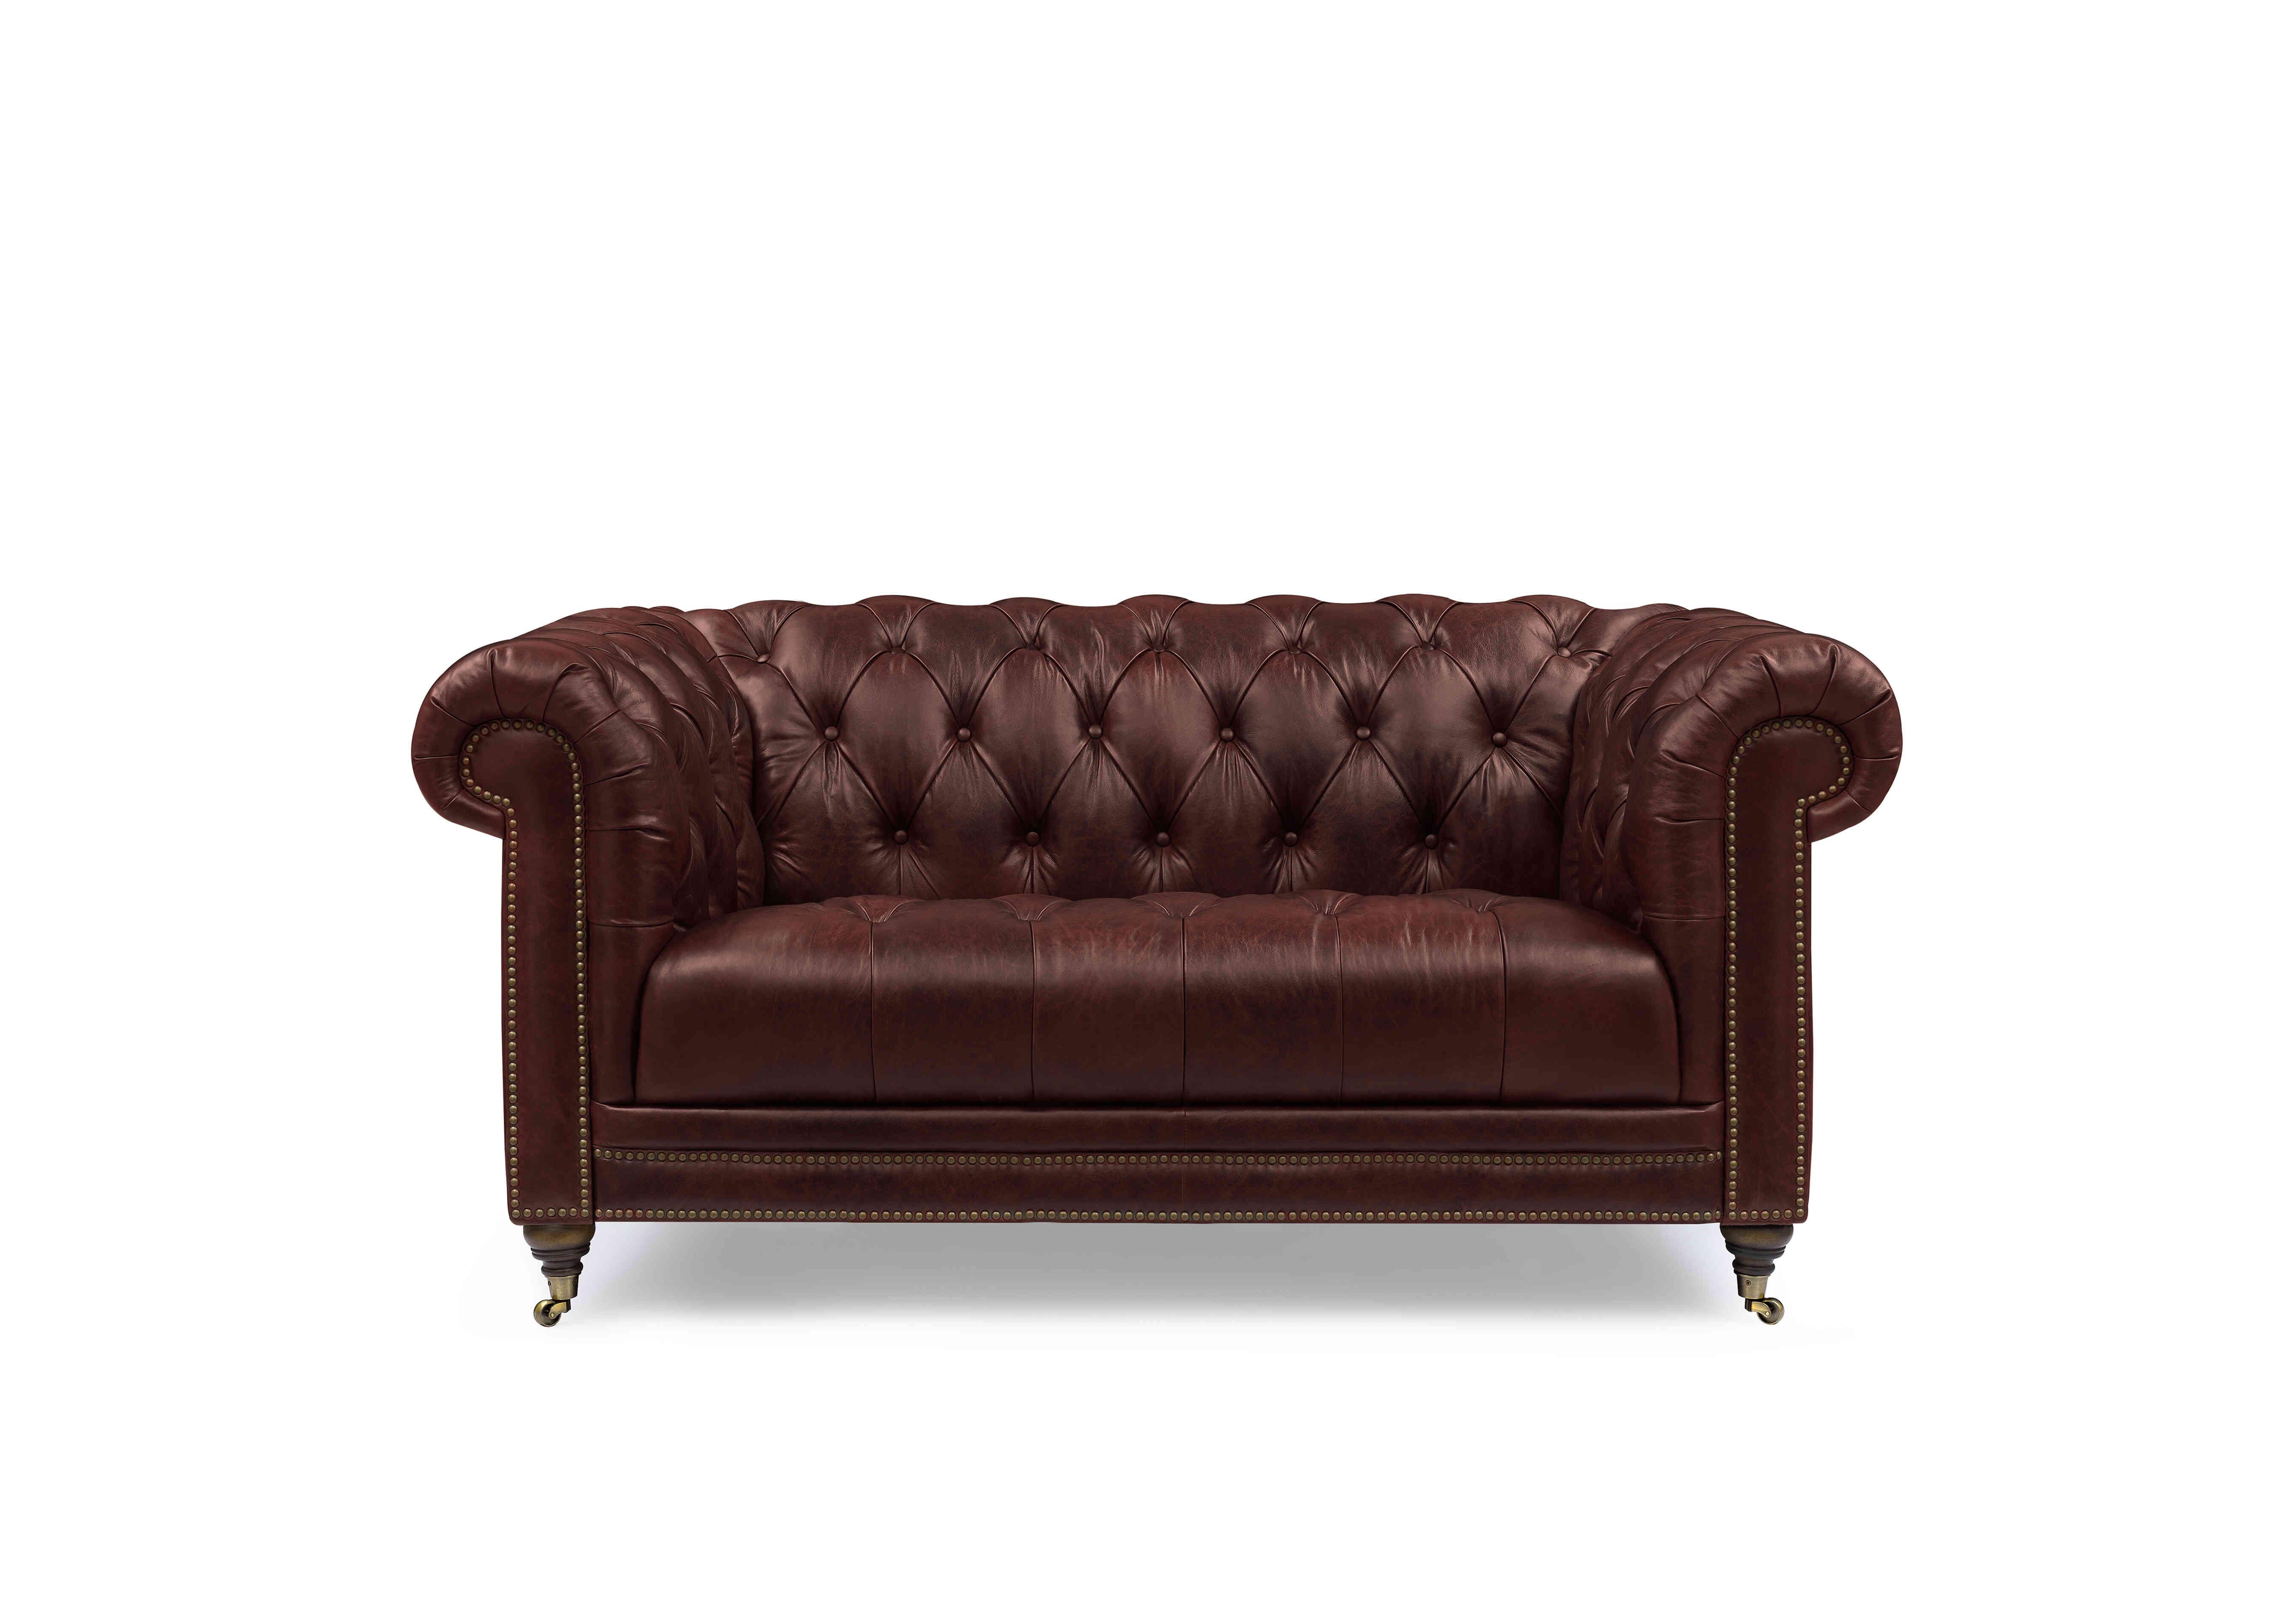 Walter 2 Seater Leather Chesterfield Sofa in X3y1-1964ls Merlot on Furniture Village